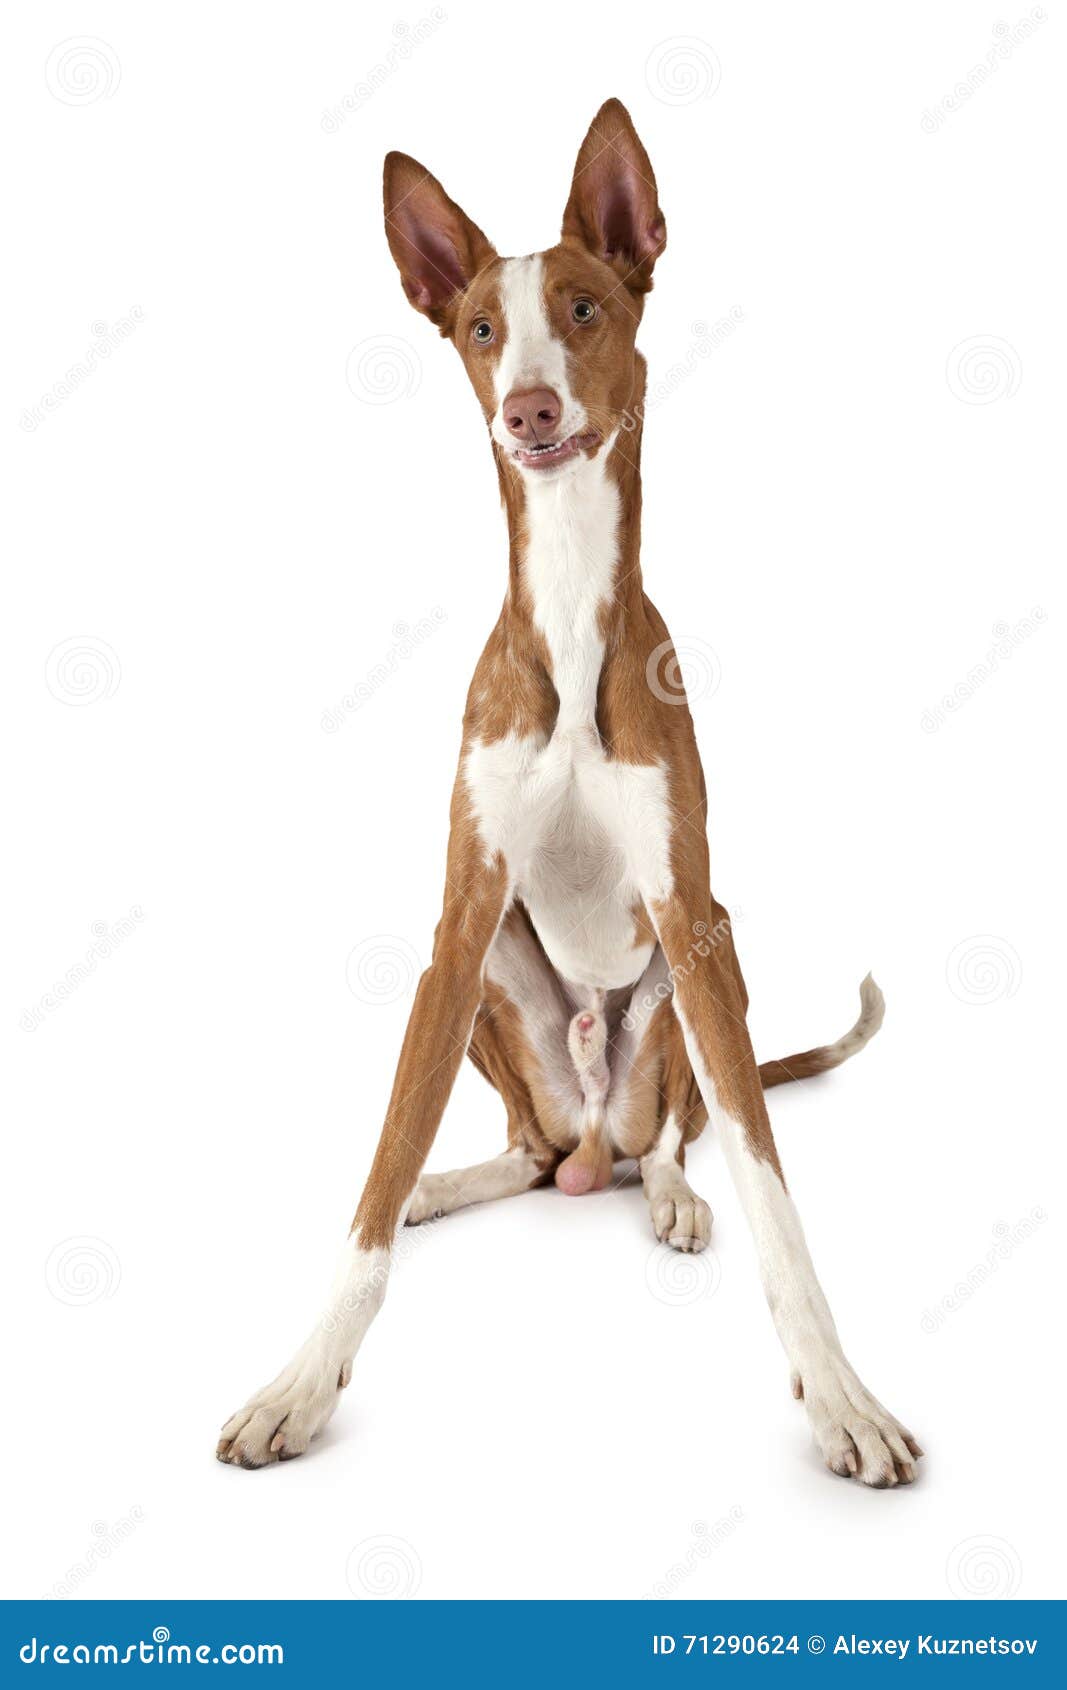 one year old podenco ibicenco dog over white